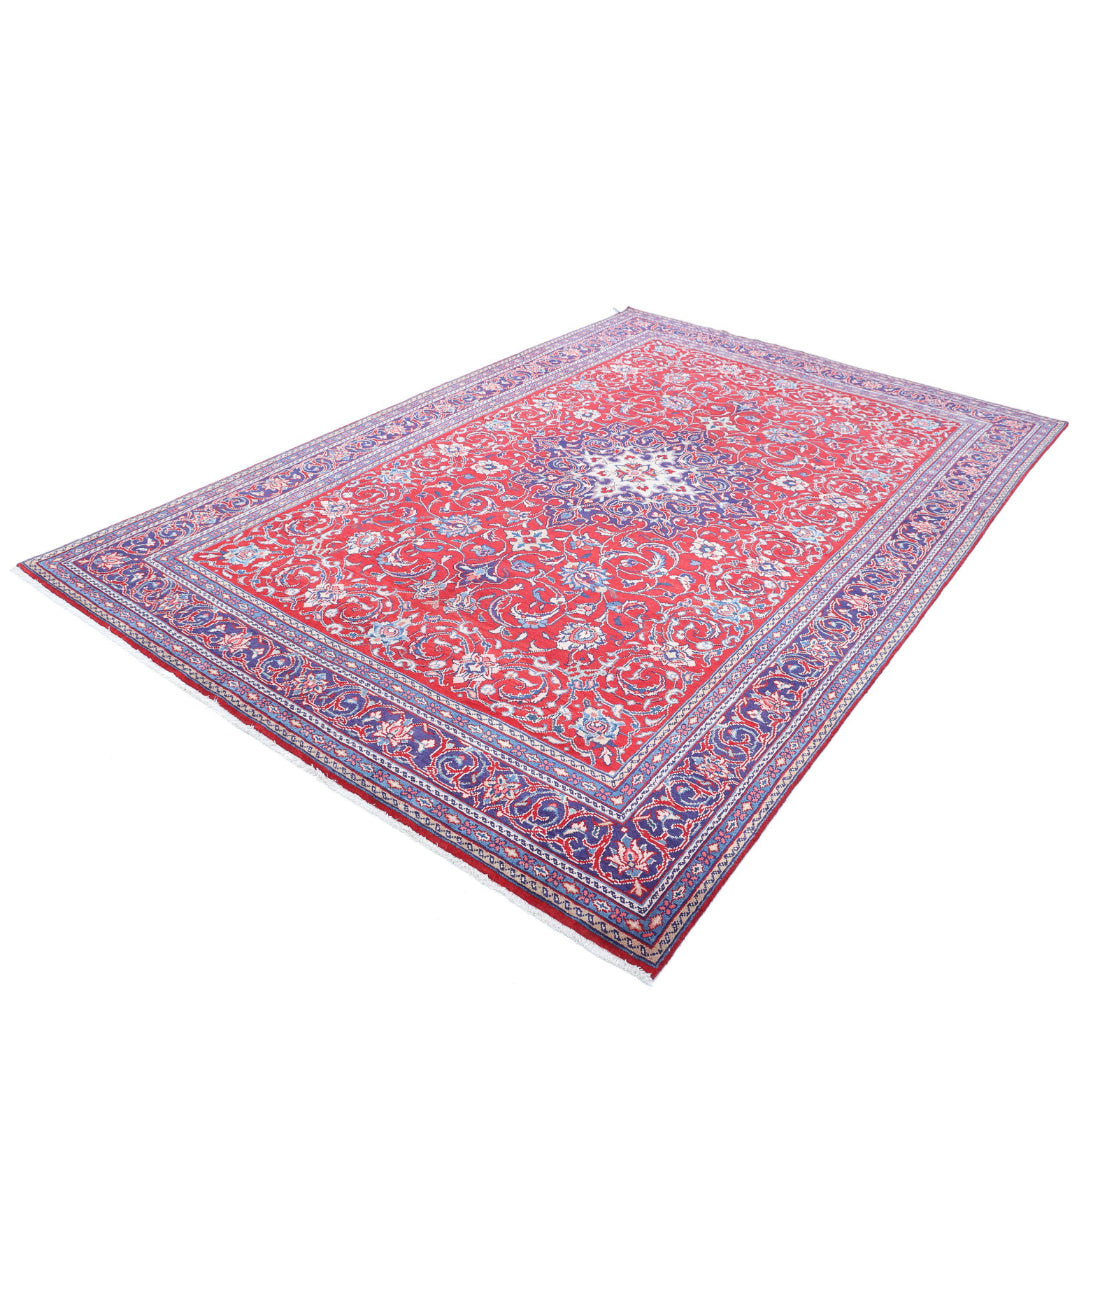 Hand Knotted Persian Mahal Wool Rug - 6'10'' x 10'5'' 6'10'' x 10'5'' (205 X 313) / Red / Blue